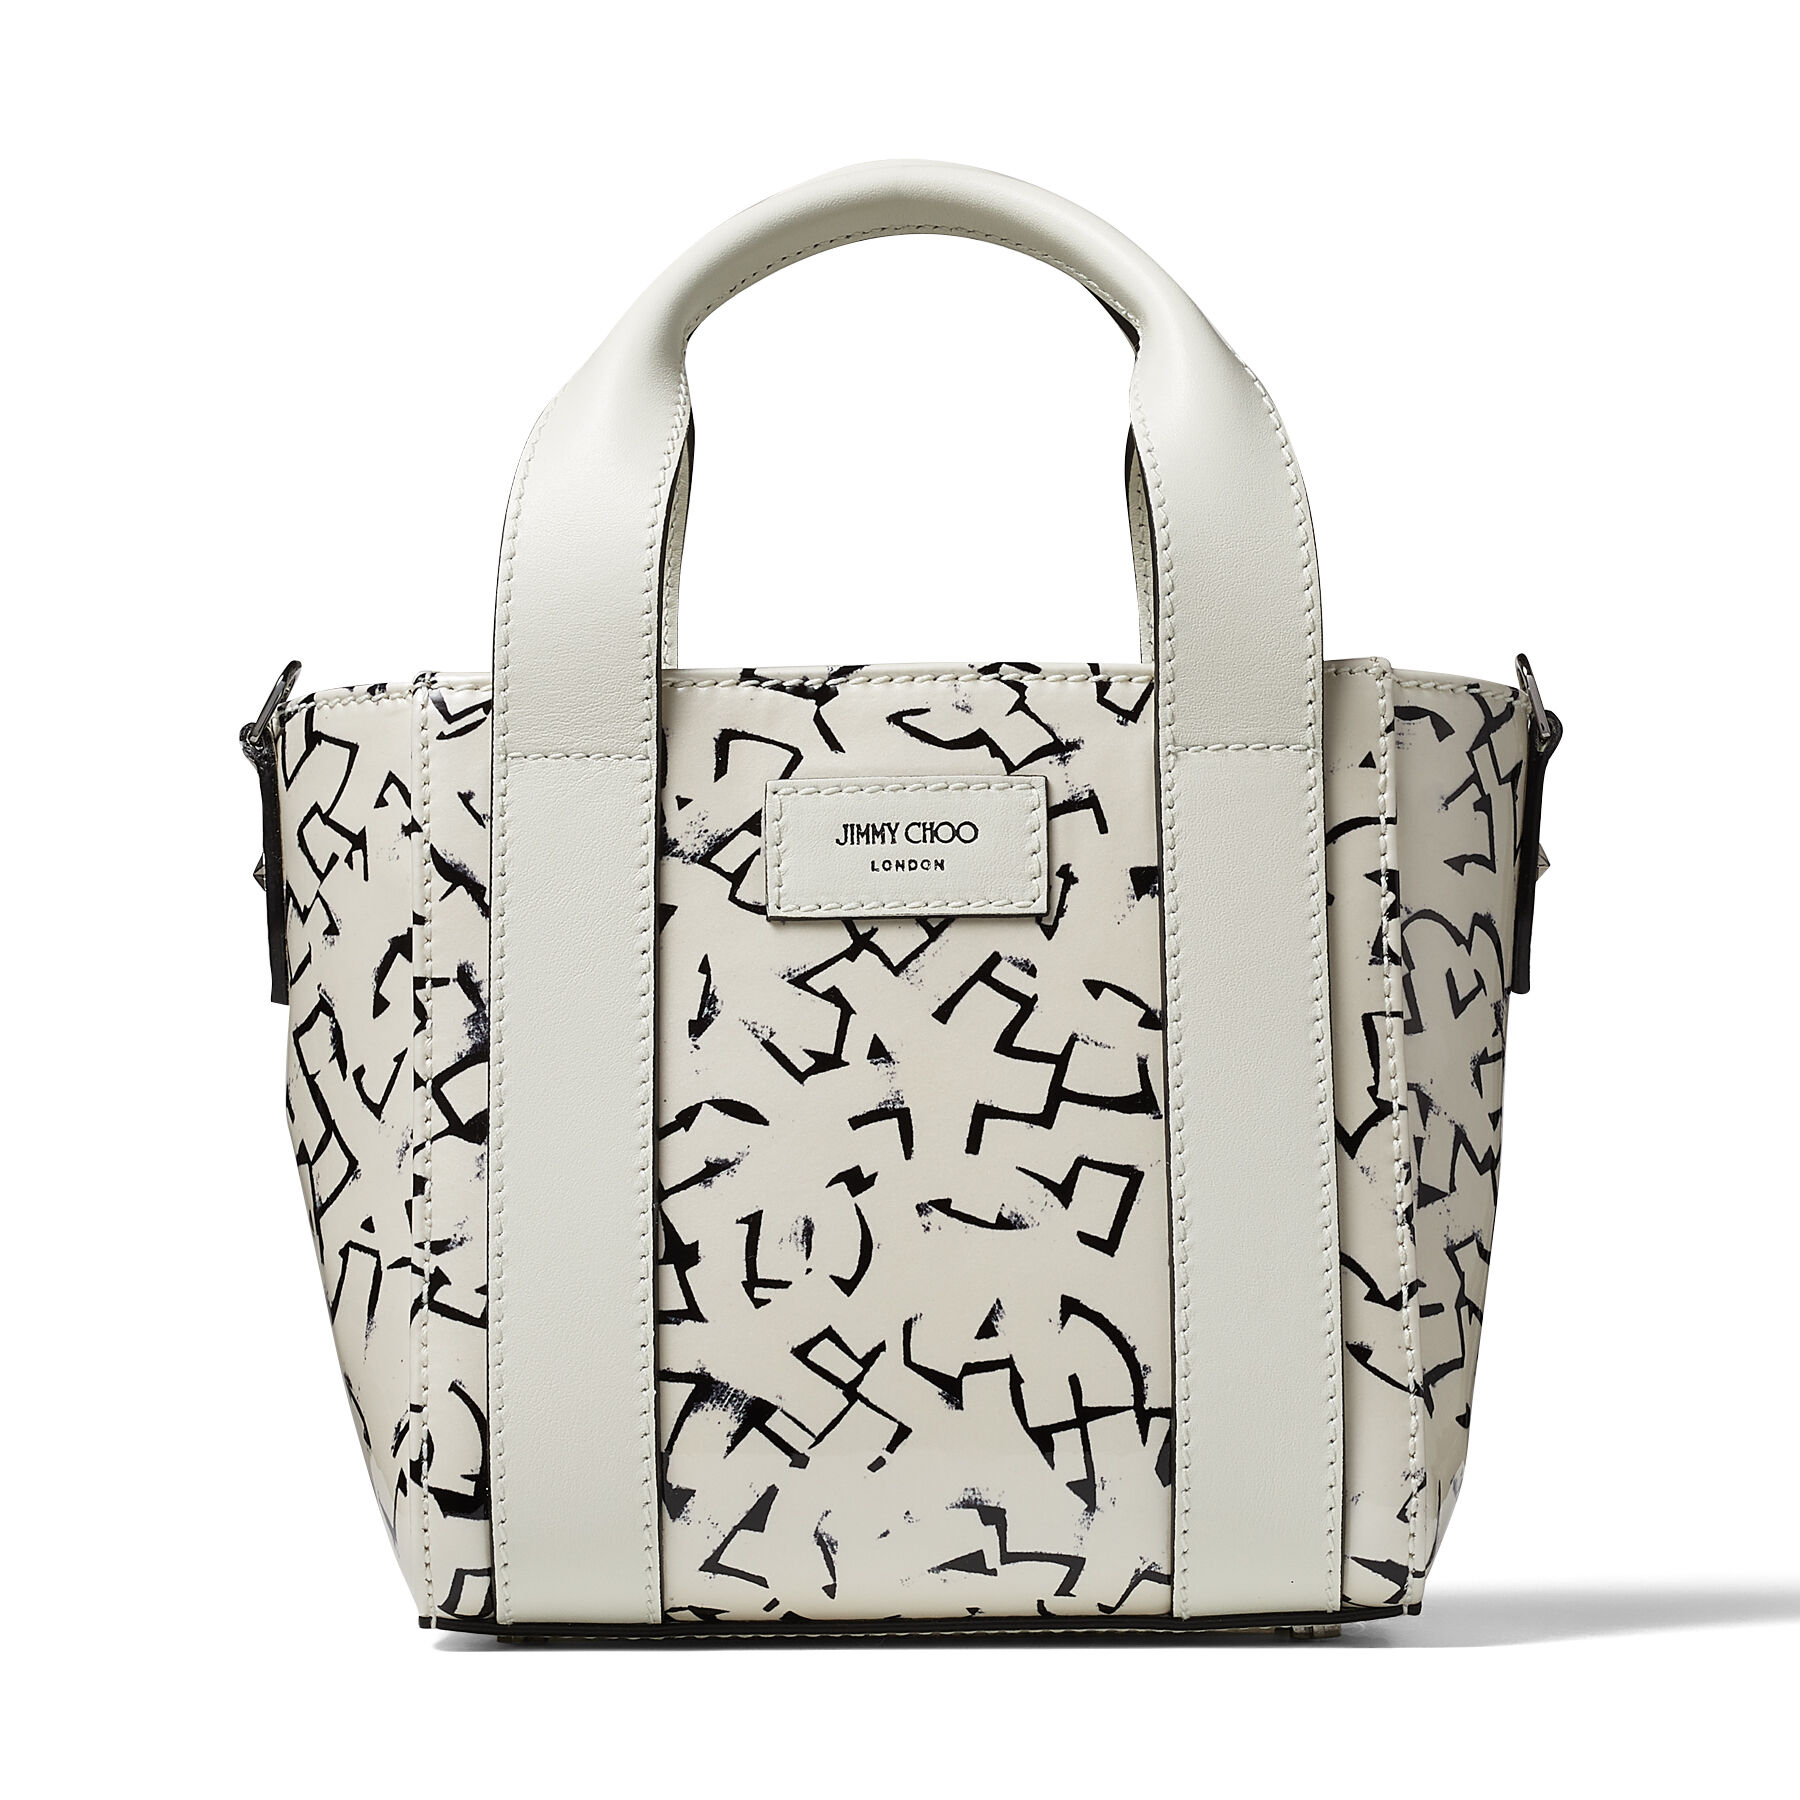 White and Black Artwork Printed Patent Leather Tote Bag | SHOPPER 